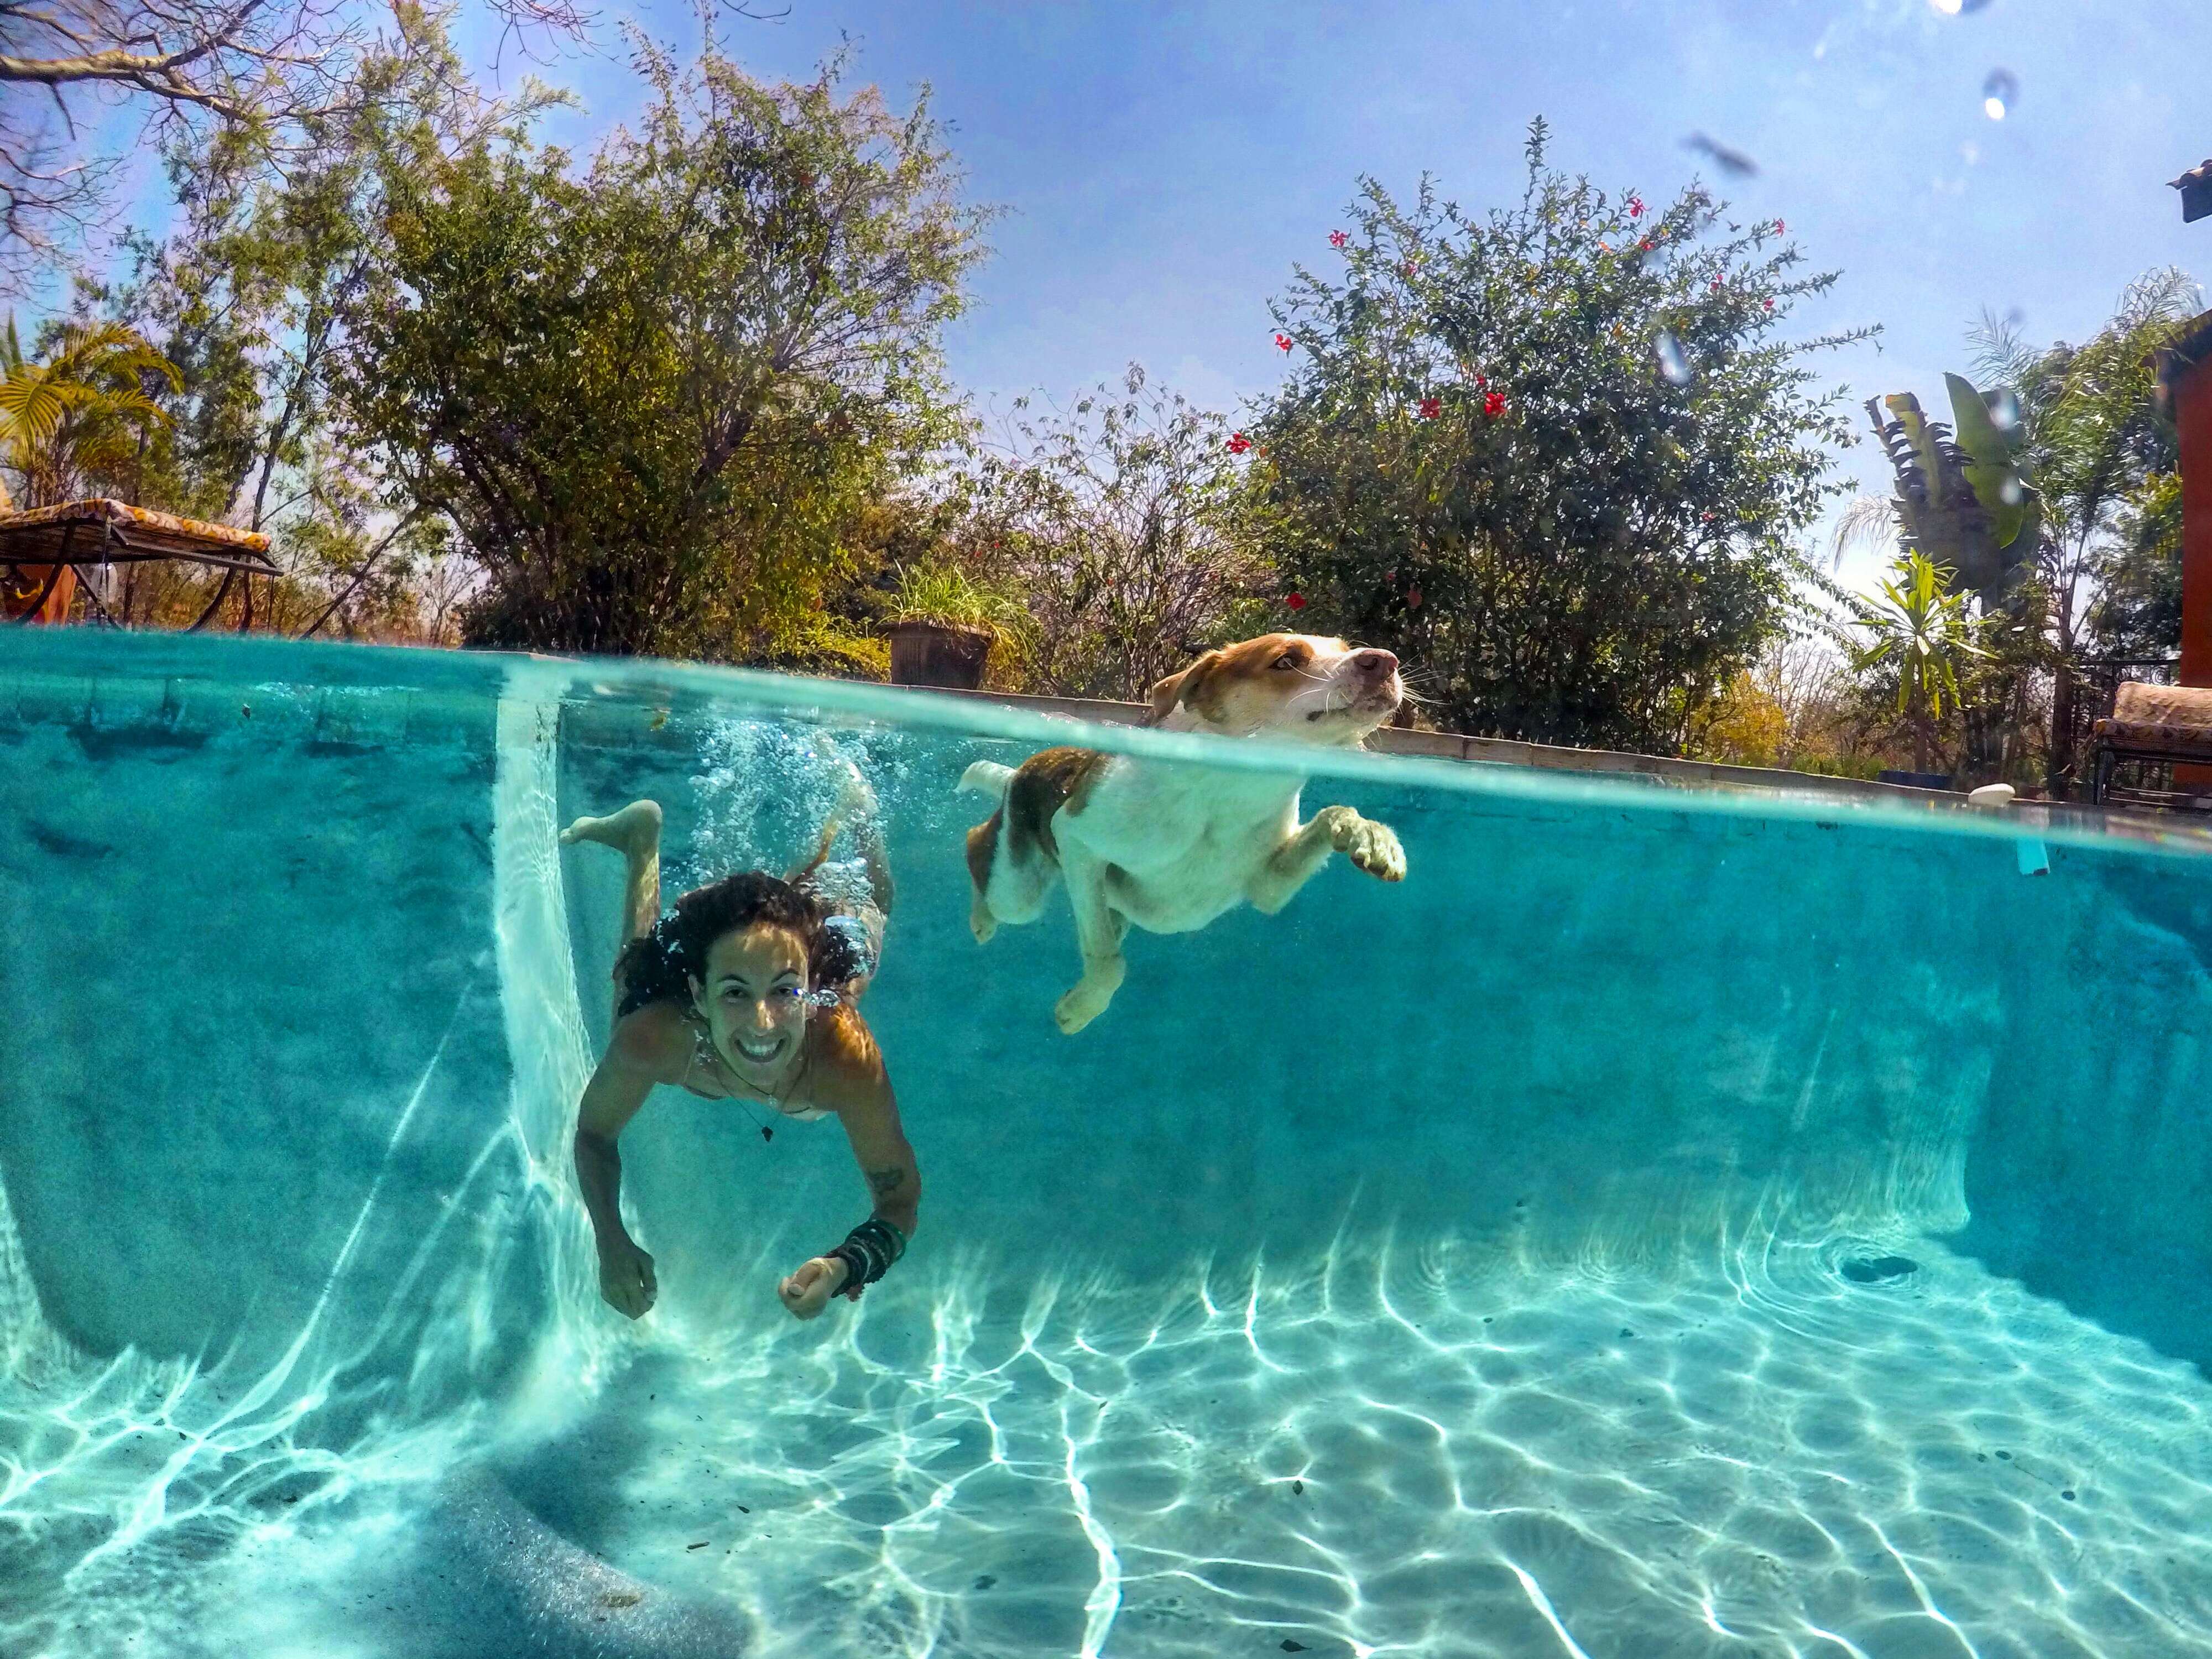 Woman and dog swimming in pool together